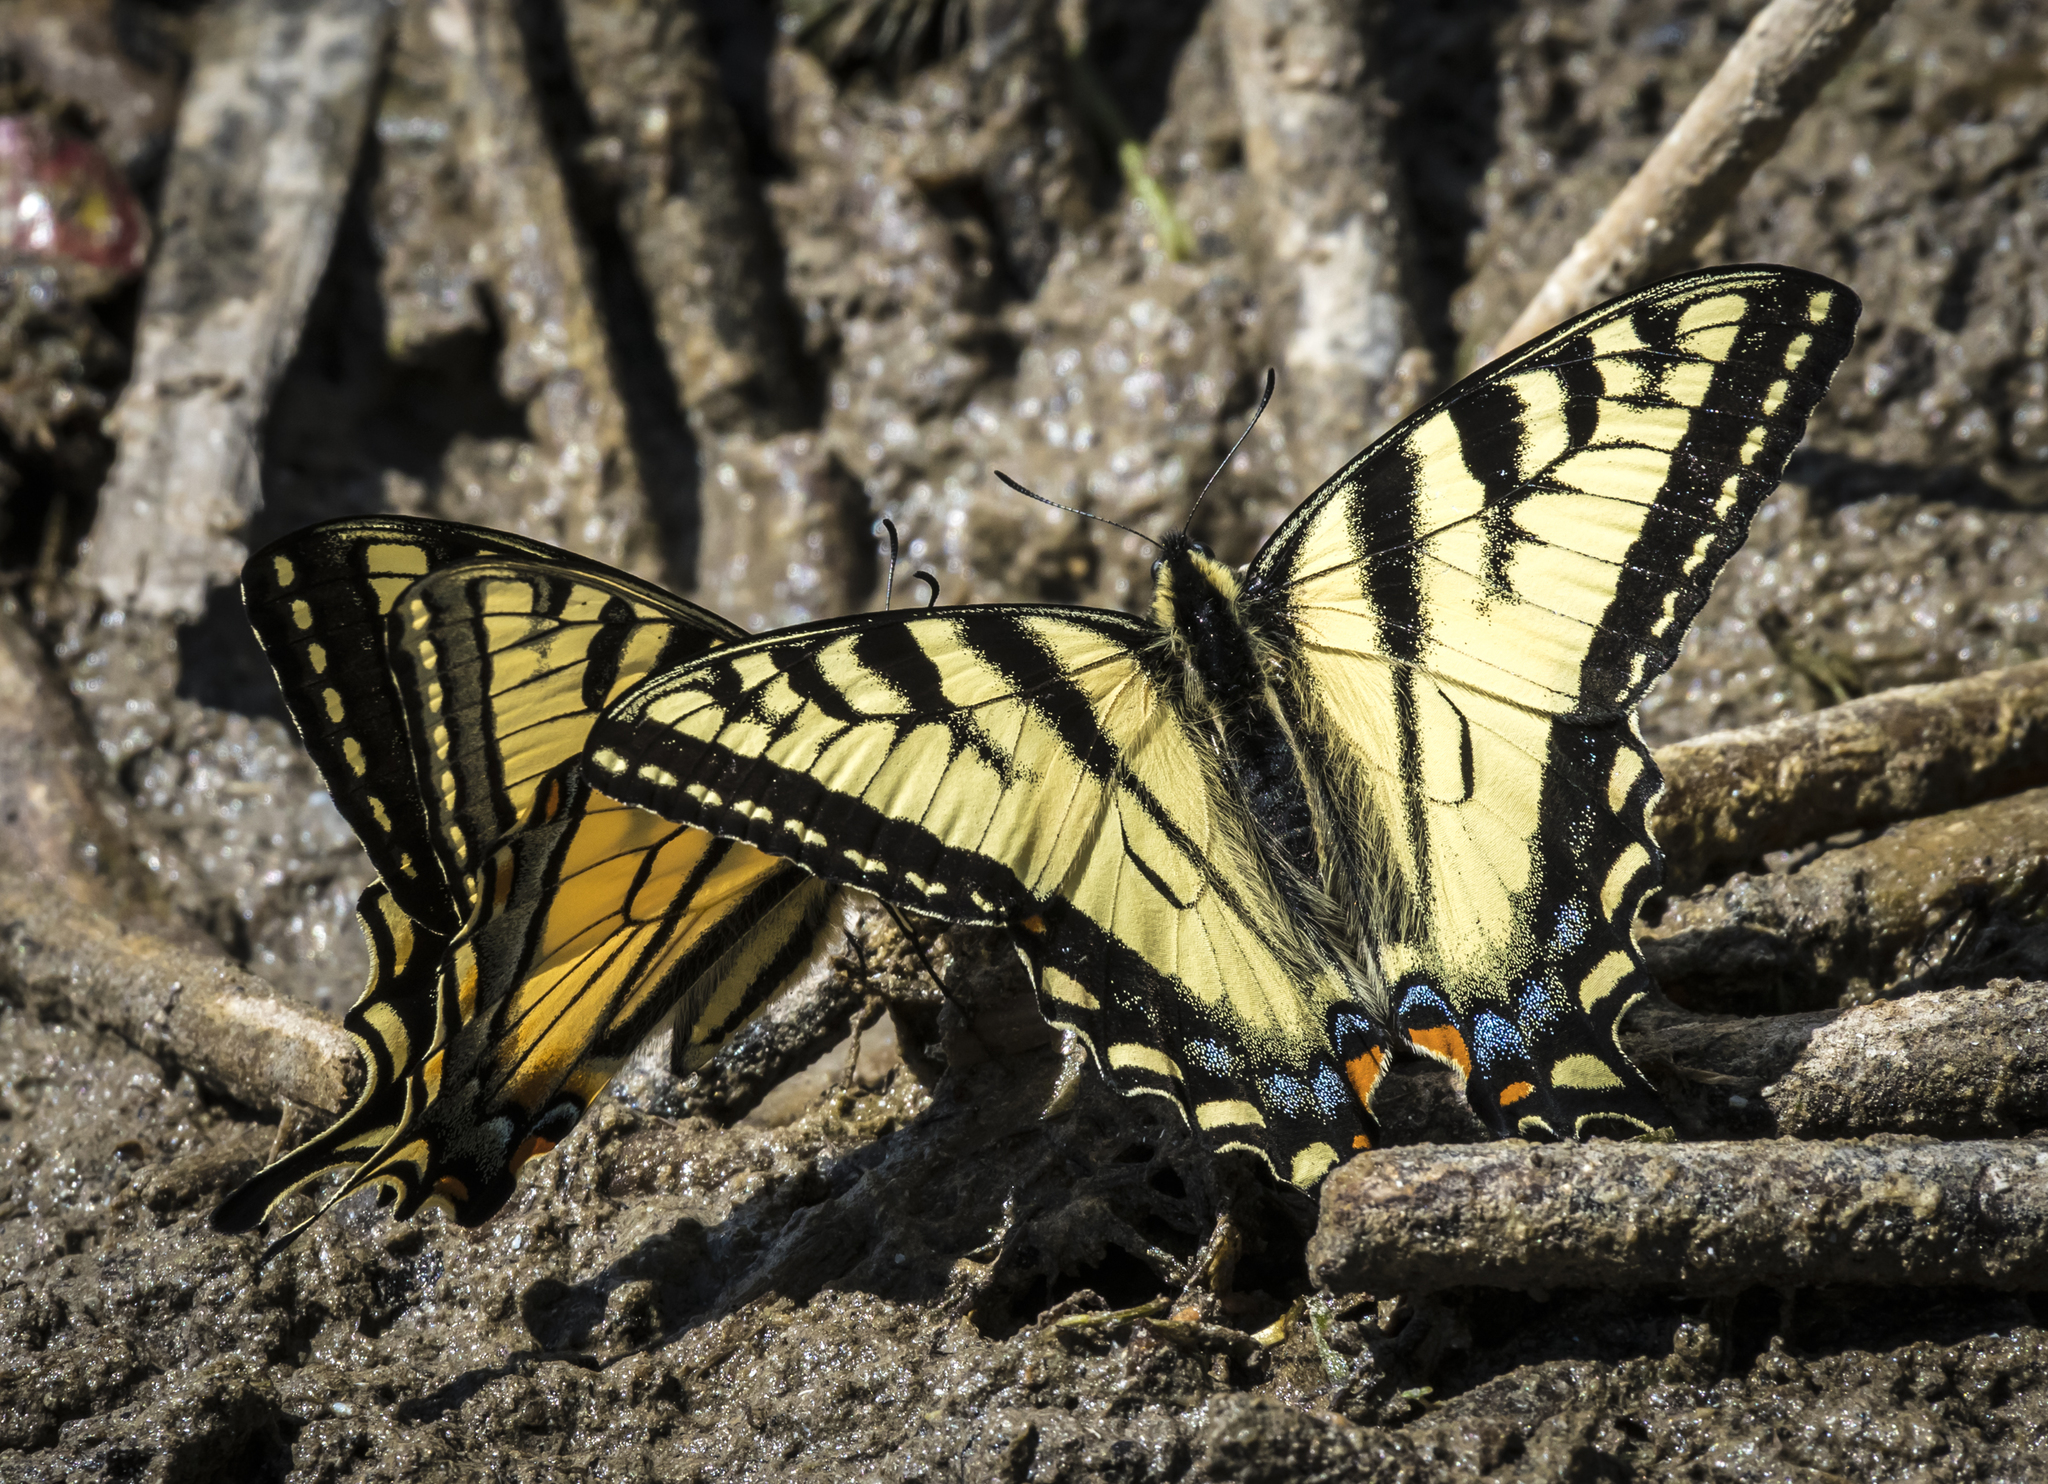 Two Canadian tiger swallowtail butterflies on the ground. Wings are soft yellow with black, blue and red.